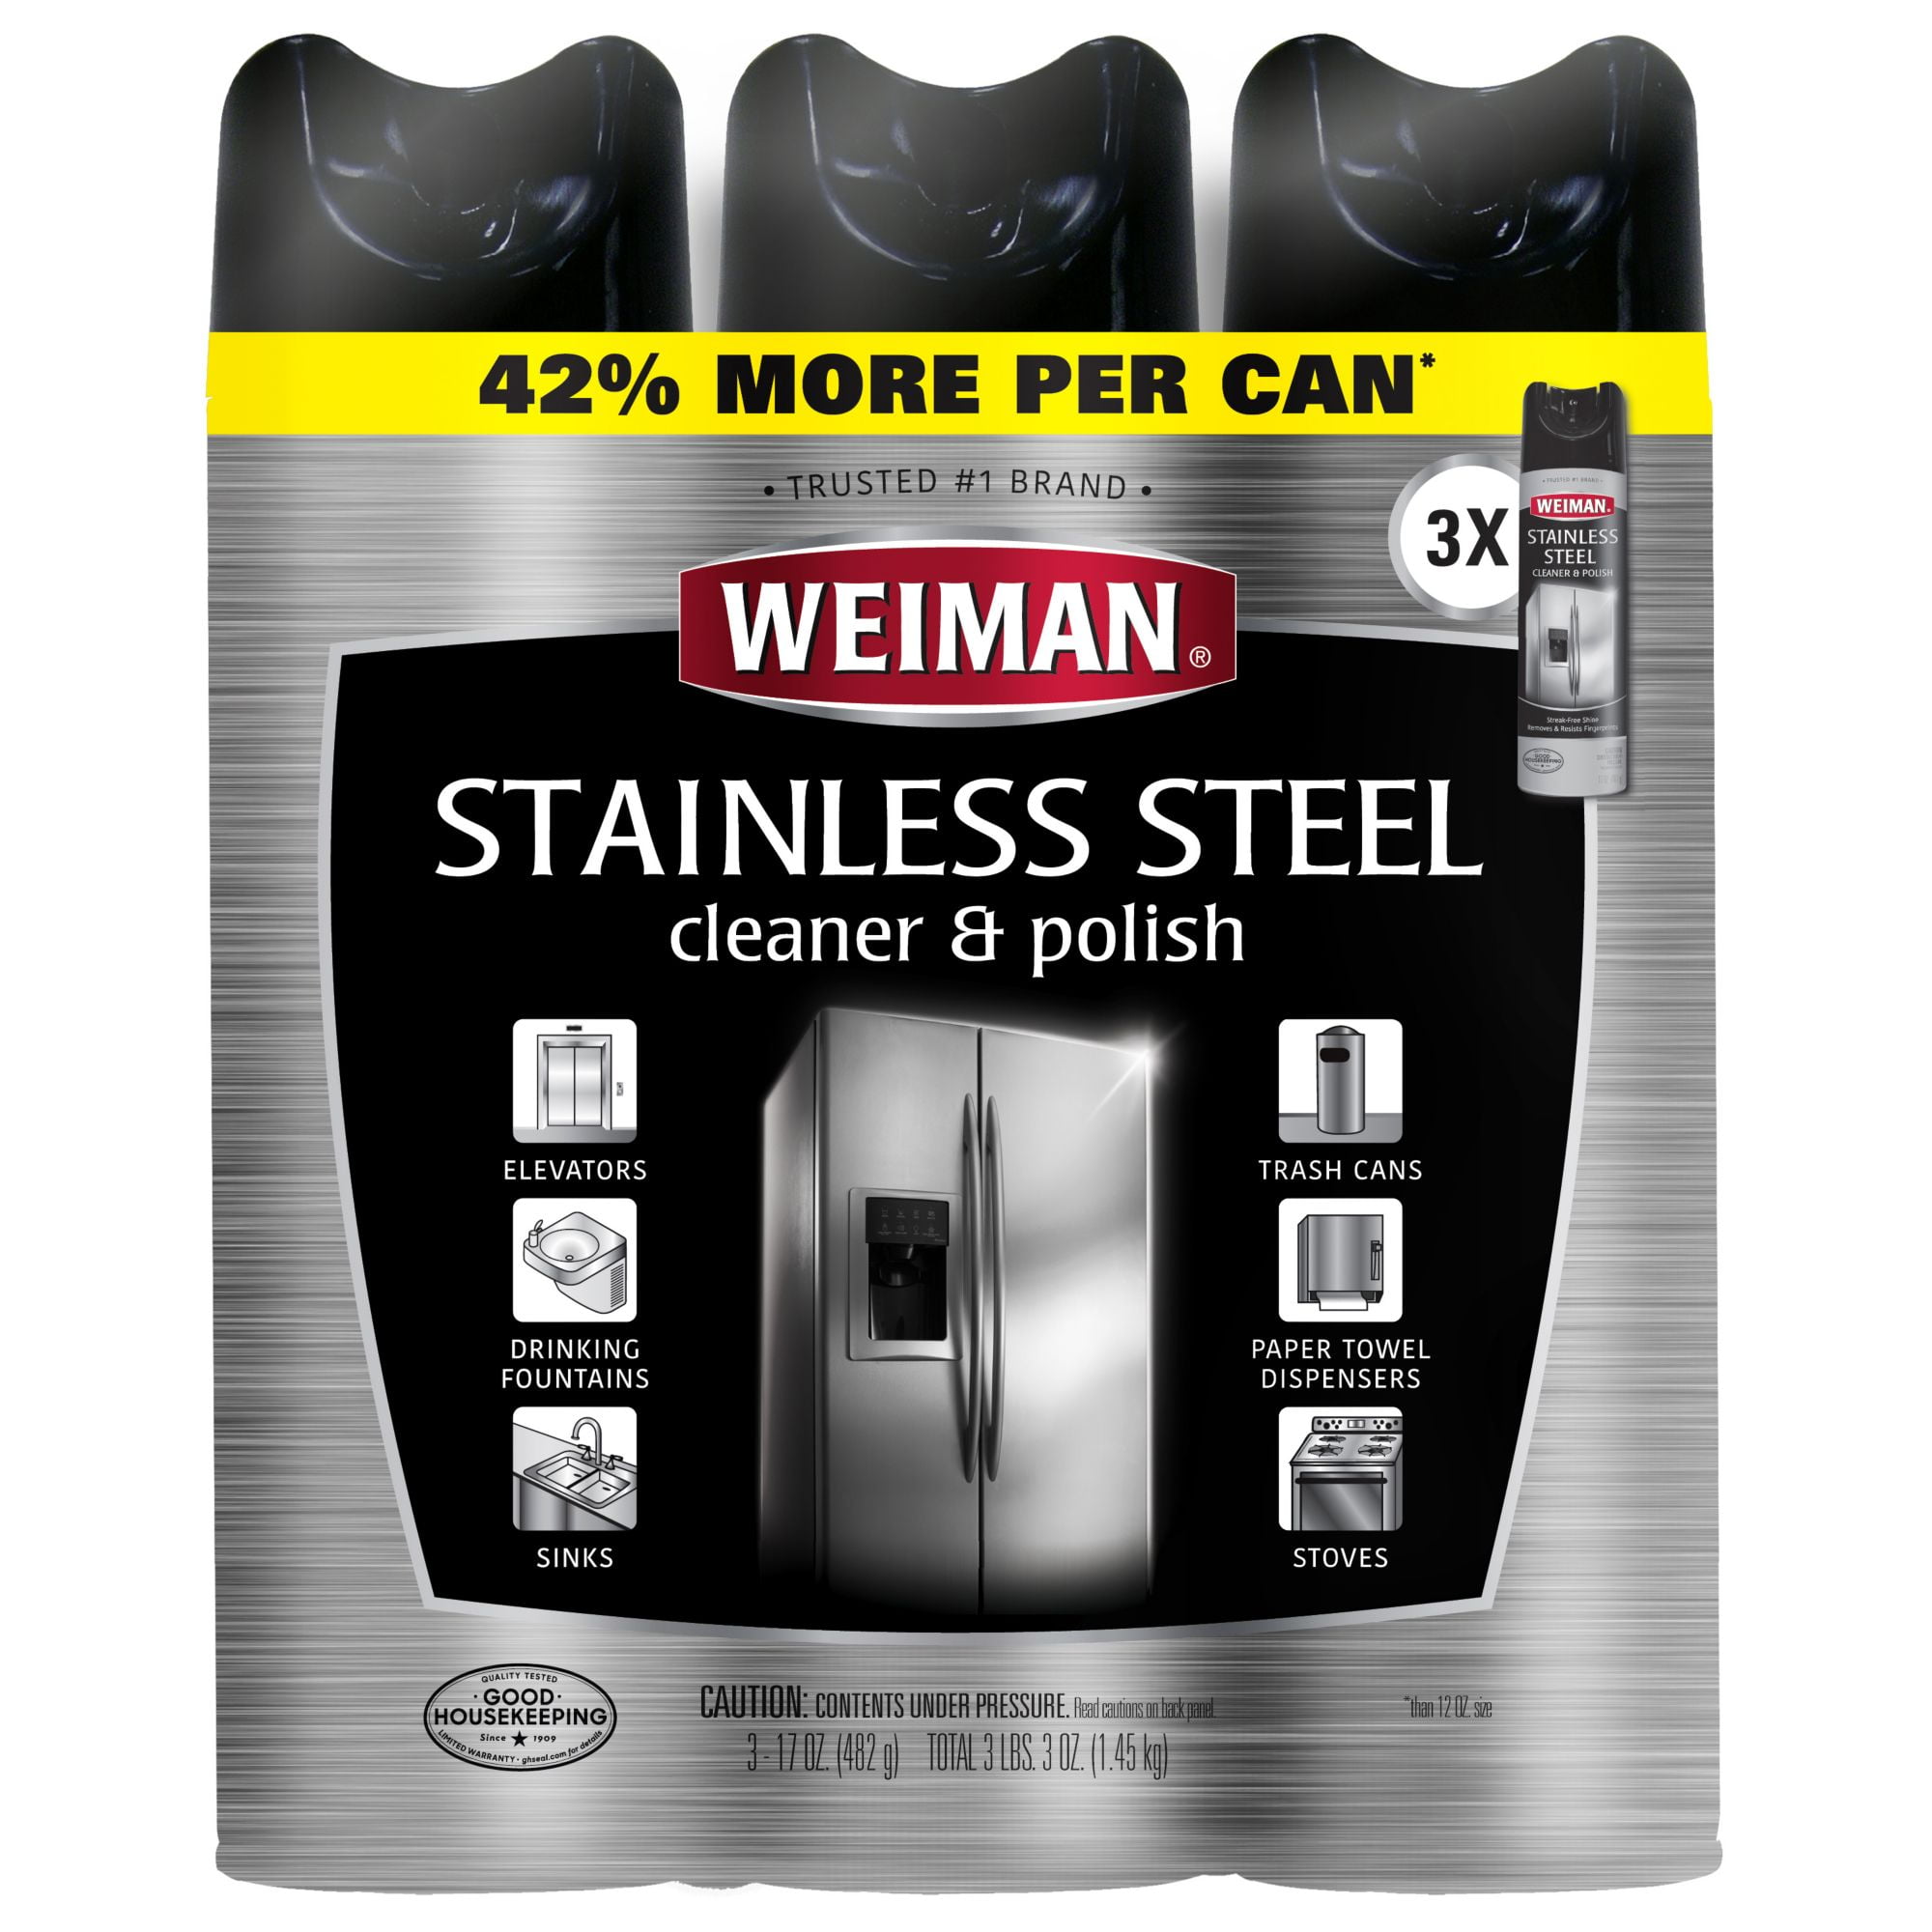 Product of Weiman Stainless Steel Cleaner, 3 pk./17 oz. - Walmart.com Stainless Steel Cleaner At Walmart